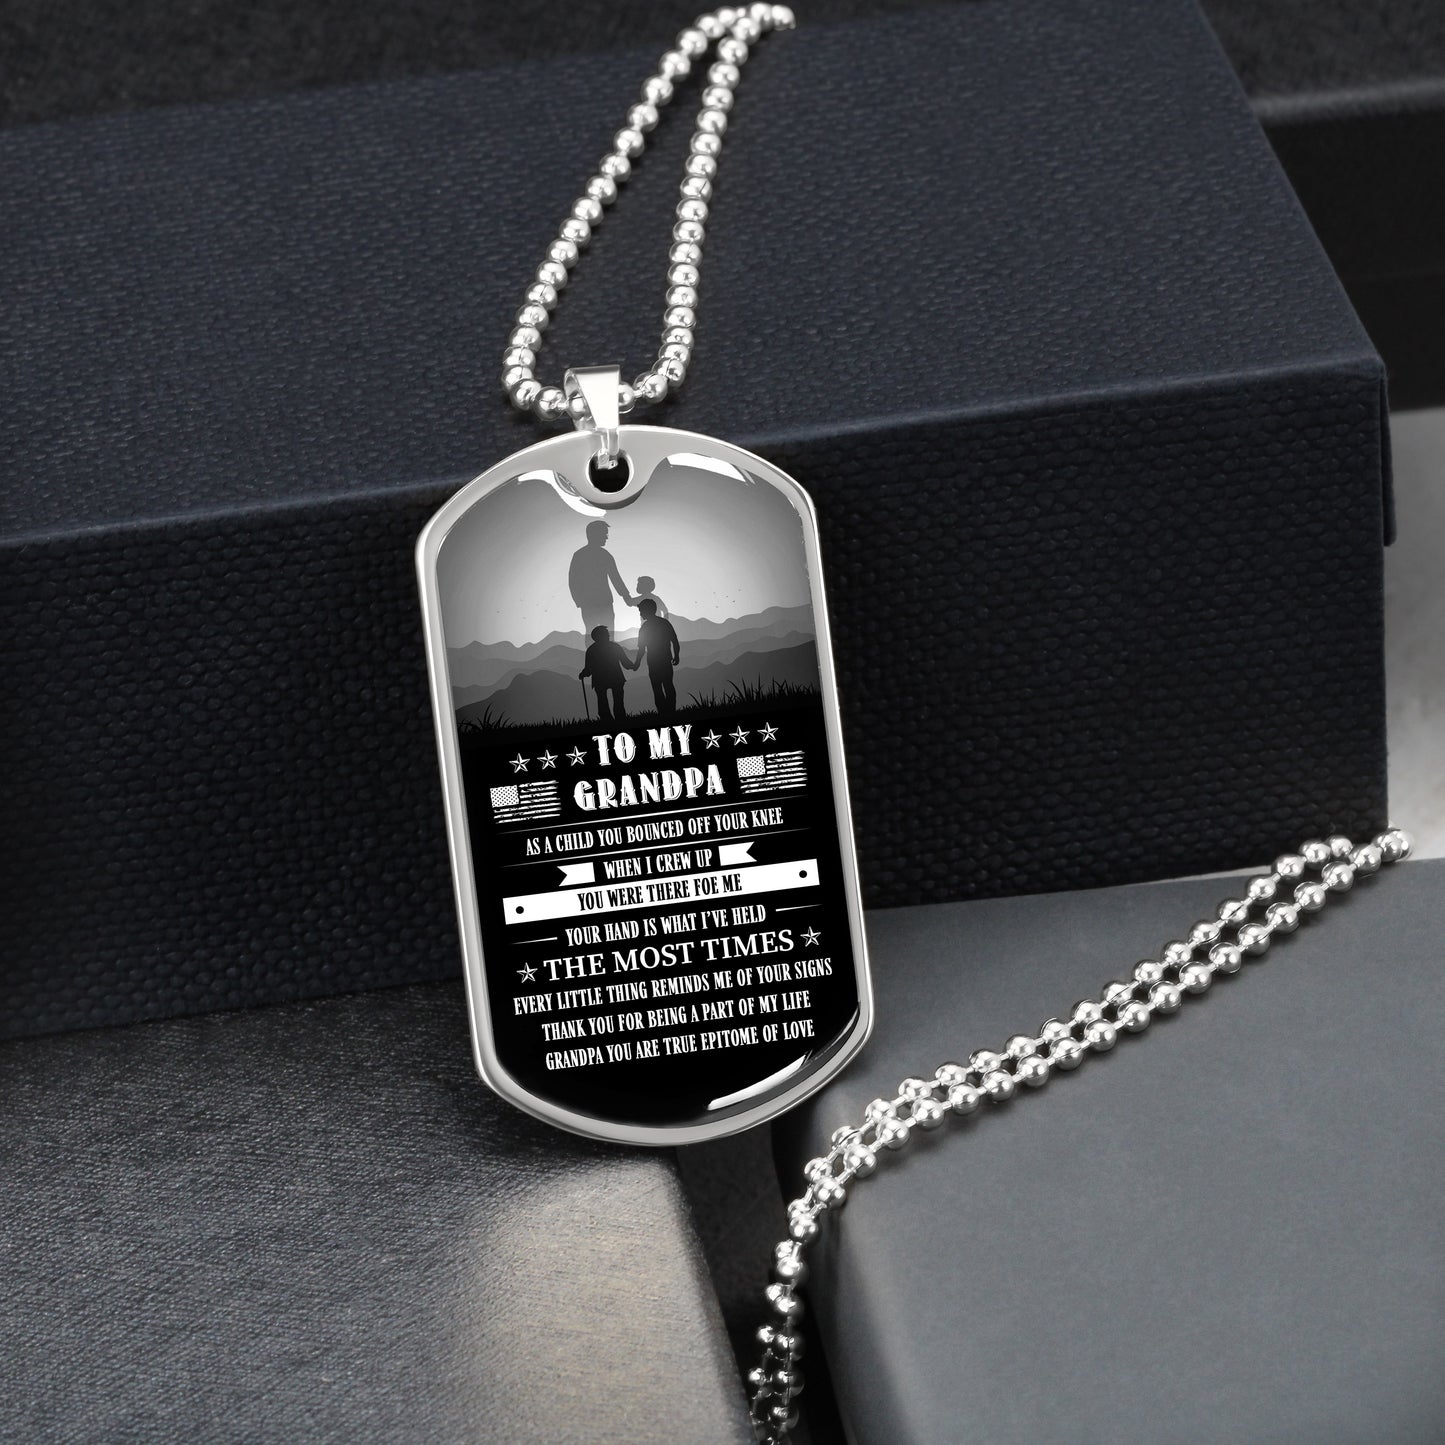 To My Grandpa - You Are True Epitome Of Love, Dog Tag necklace Meaningful Message to Grandparent